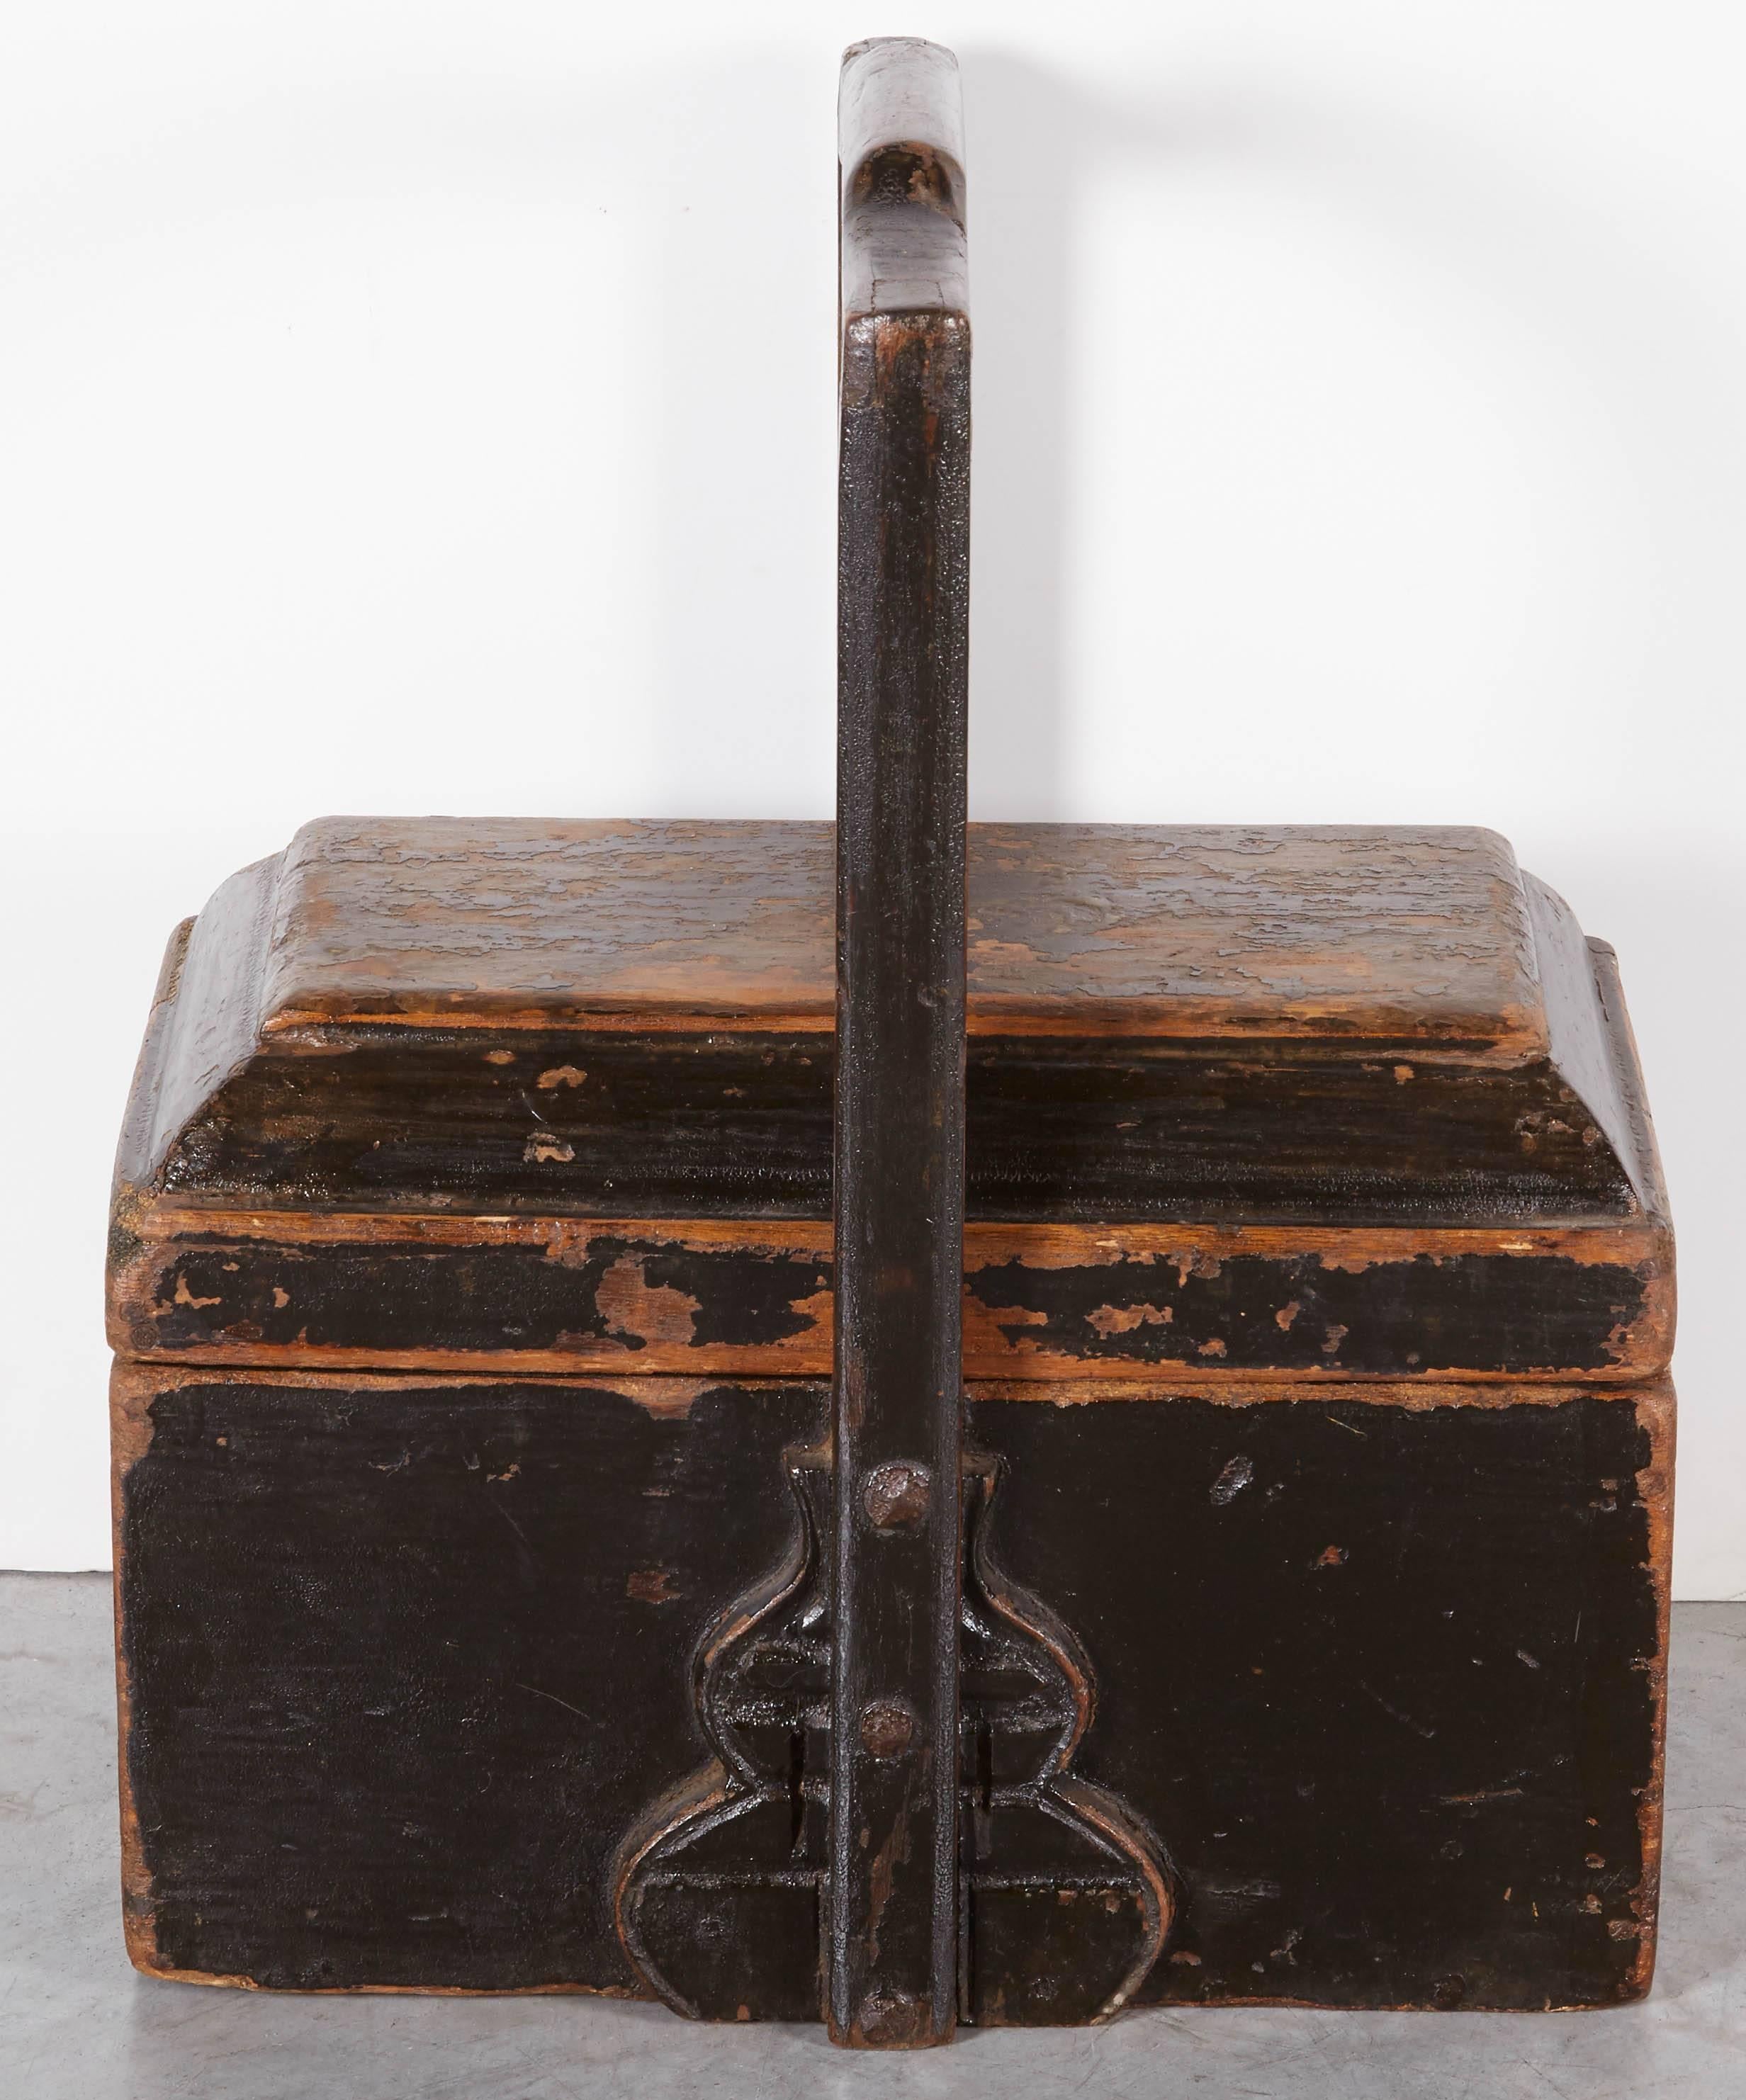 A simply designed and nicely carved antique wooden Chinese food box with large handle and great wear. A very useful piece great for holding mail or keys at entryway to home.
BX478.